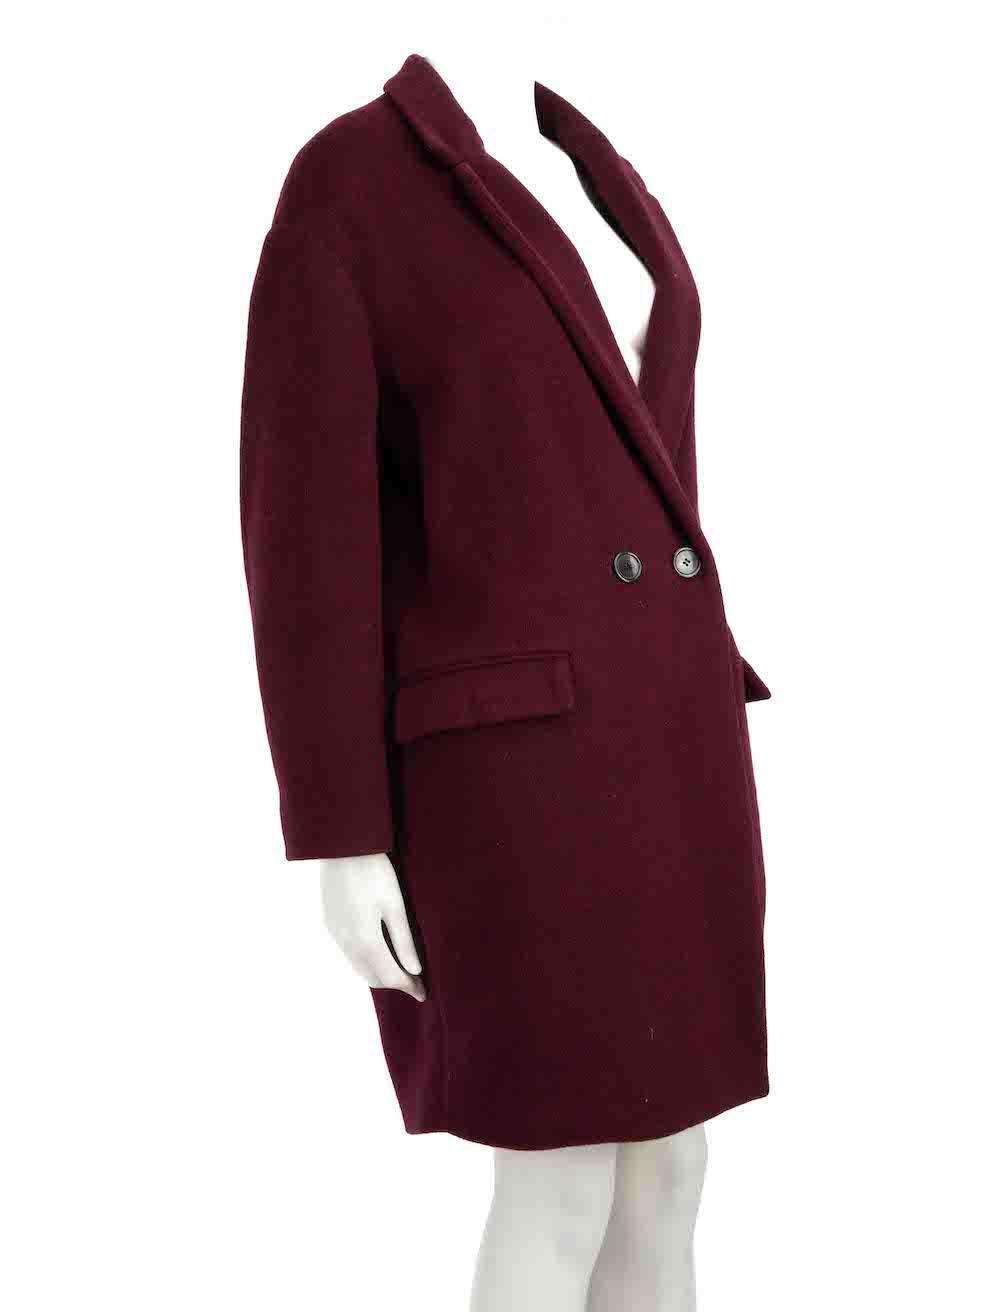 CONDITION is Never worn. No visible wear to coat is evident on this new Isabel Marant designer resale item.
 
 Details
 Burgundy
 Wool
 Coat
 Double breasted
 Button fastening
 2x Front pockets
 
 
 Made in Poland
 
 Composition
 84% Wool, 15%